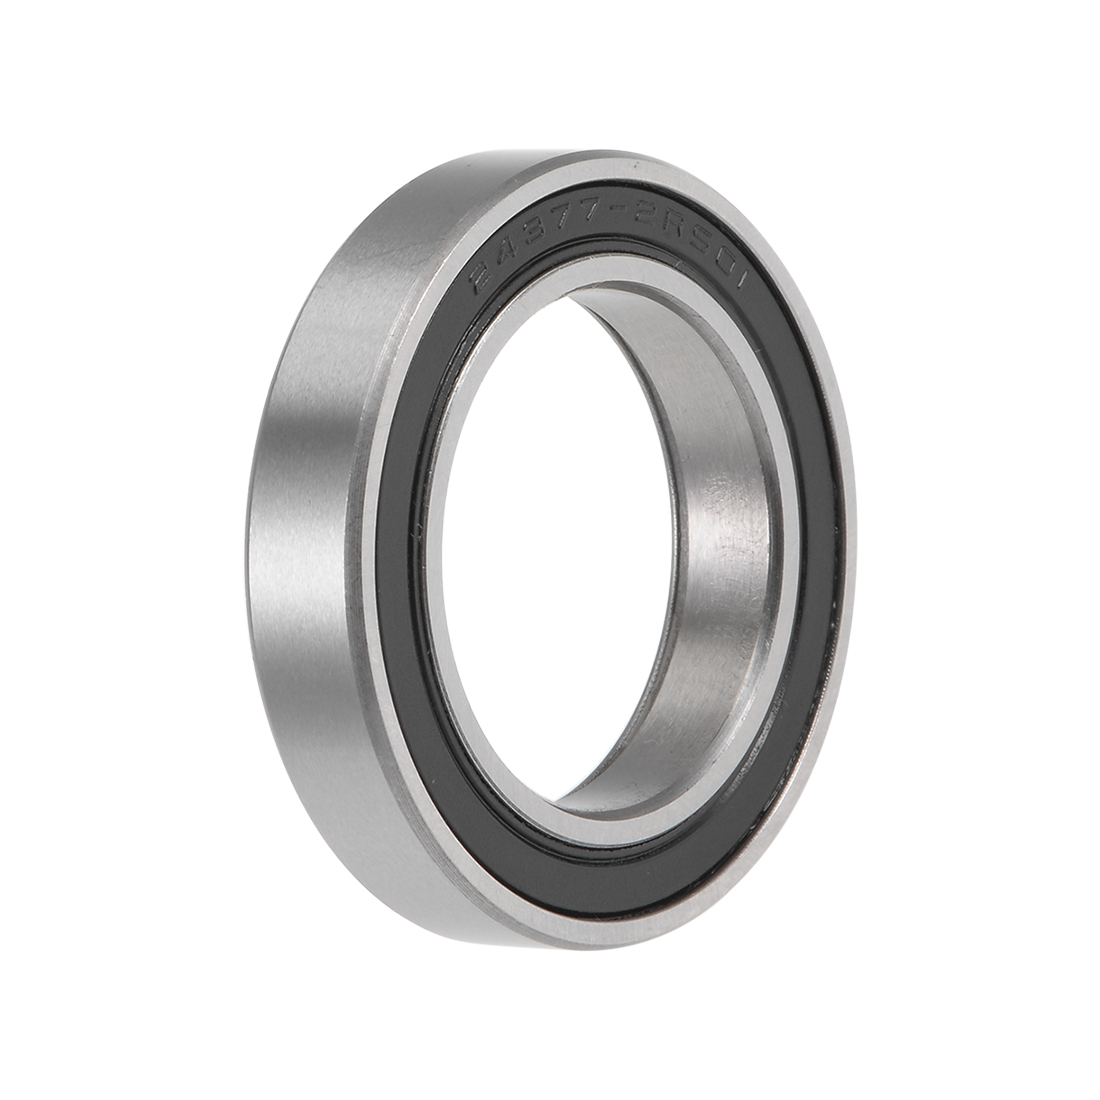 uxcell MR24377-2RS Deep Groove Ball Bearings 24mm x 37mm x 7mm Double Sealed Chrome Steel P0(ABEC1)